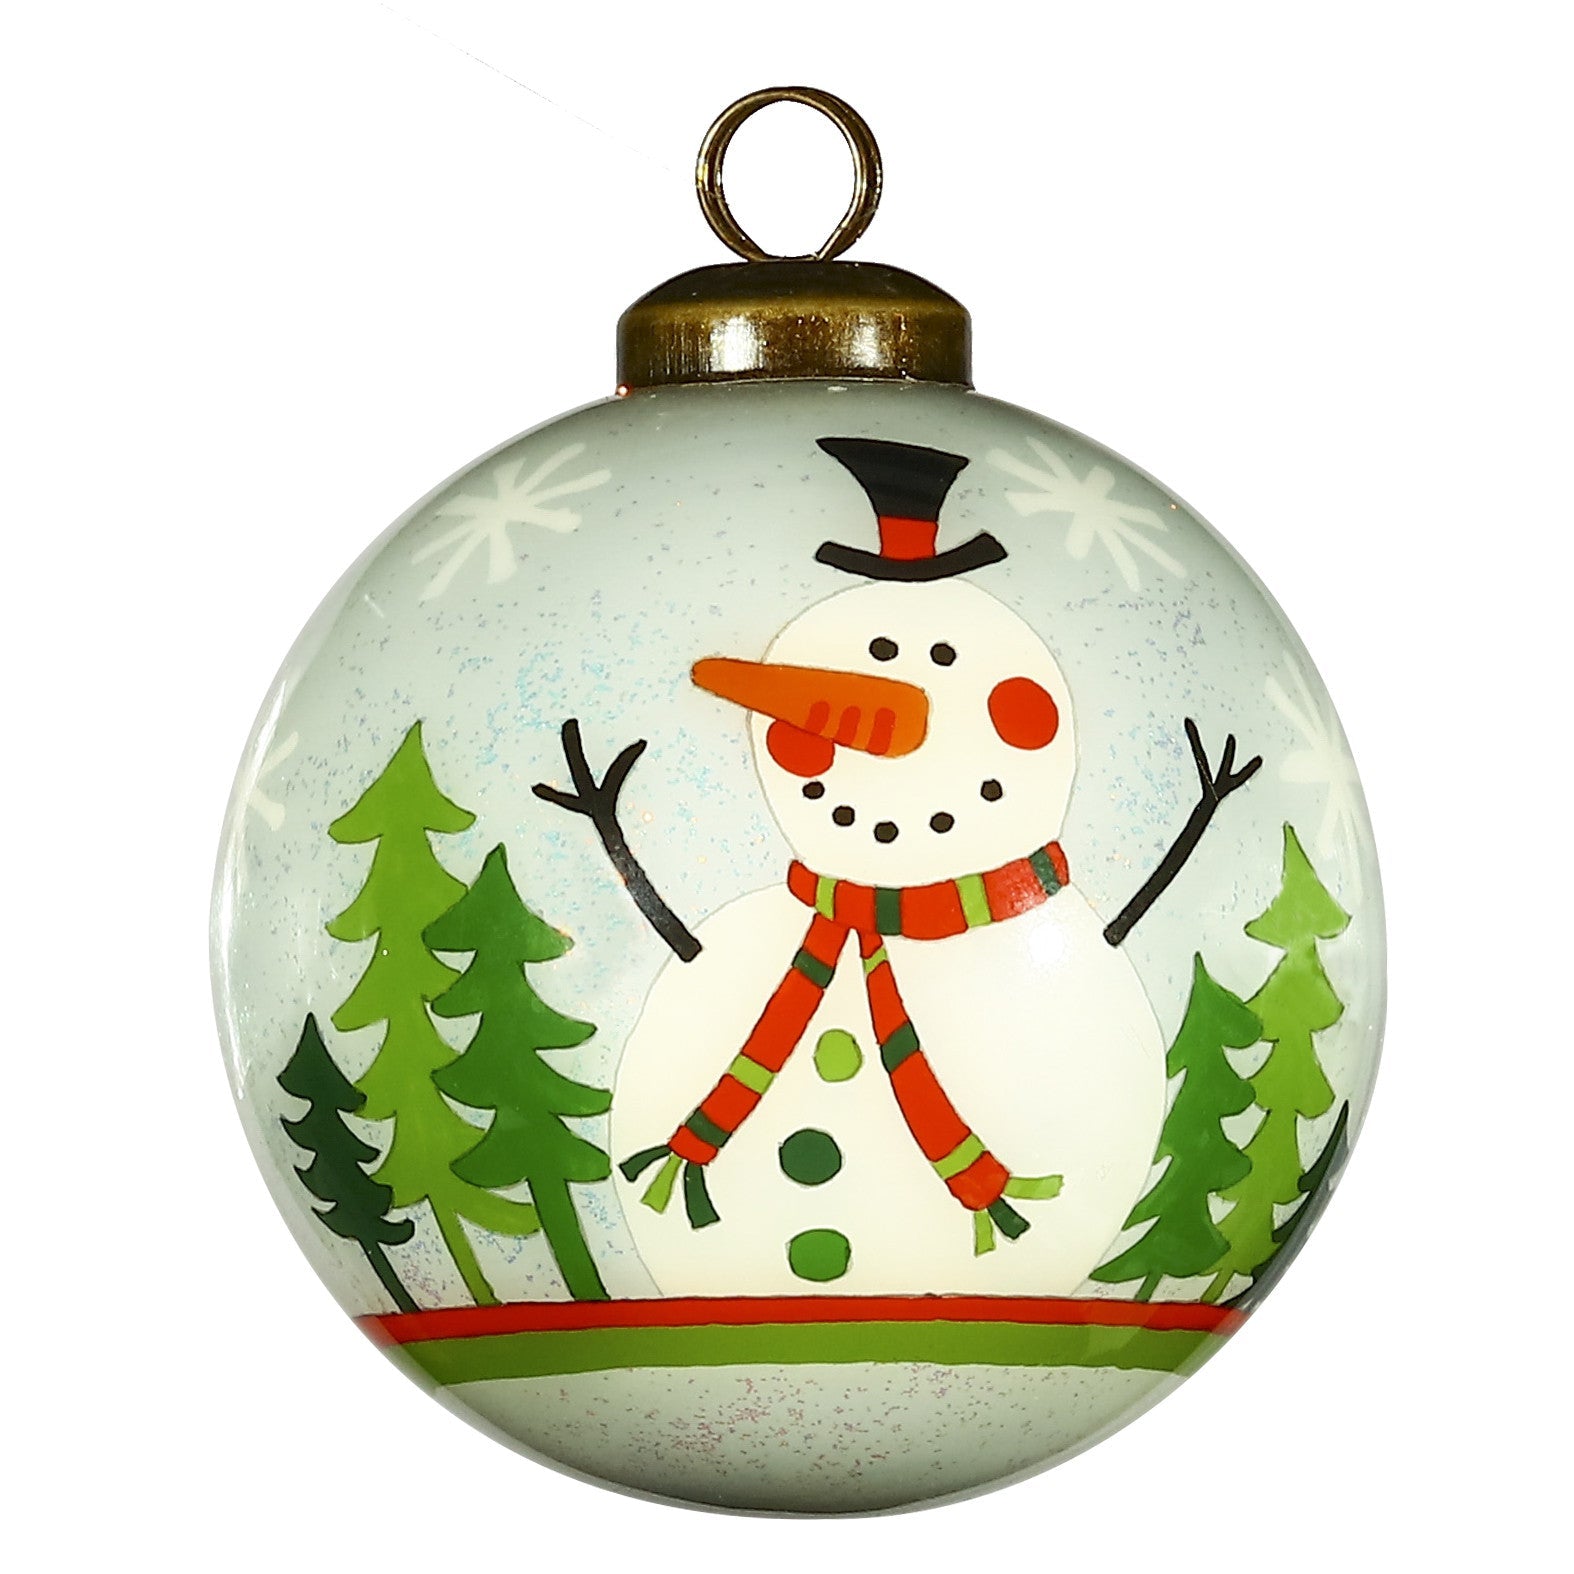 Festive-Glitter-Snowman-Hand-Painted-Mouth-Blown-Glass-Ornament-Christmas-Ornaments